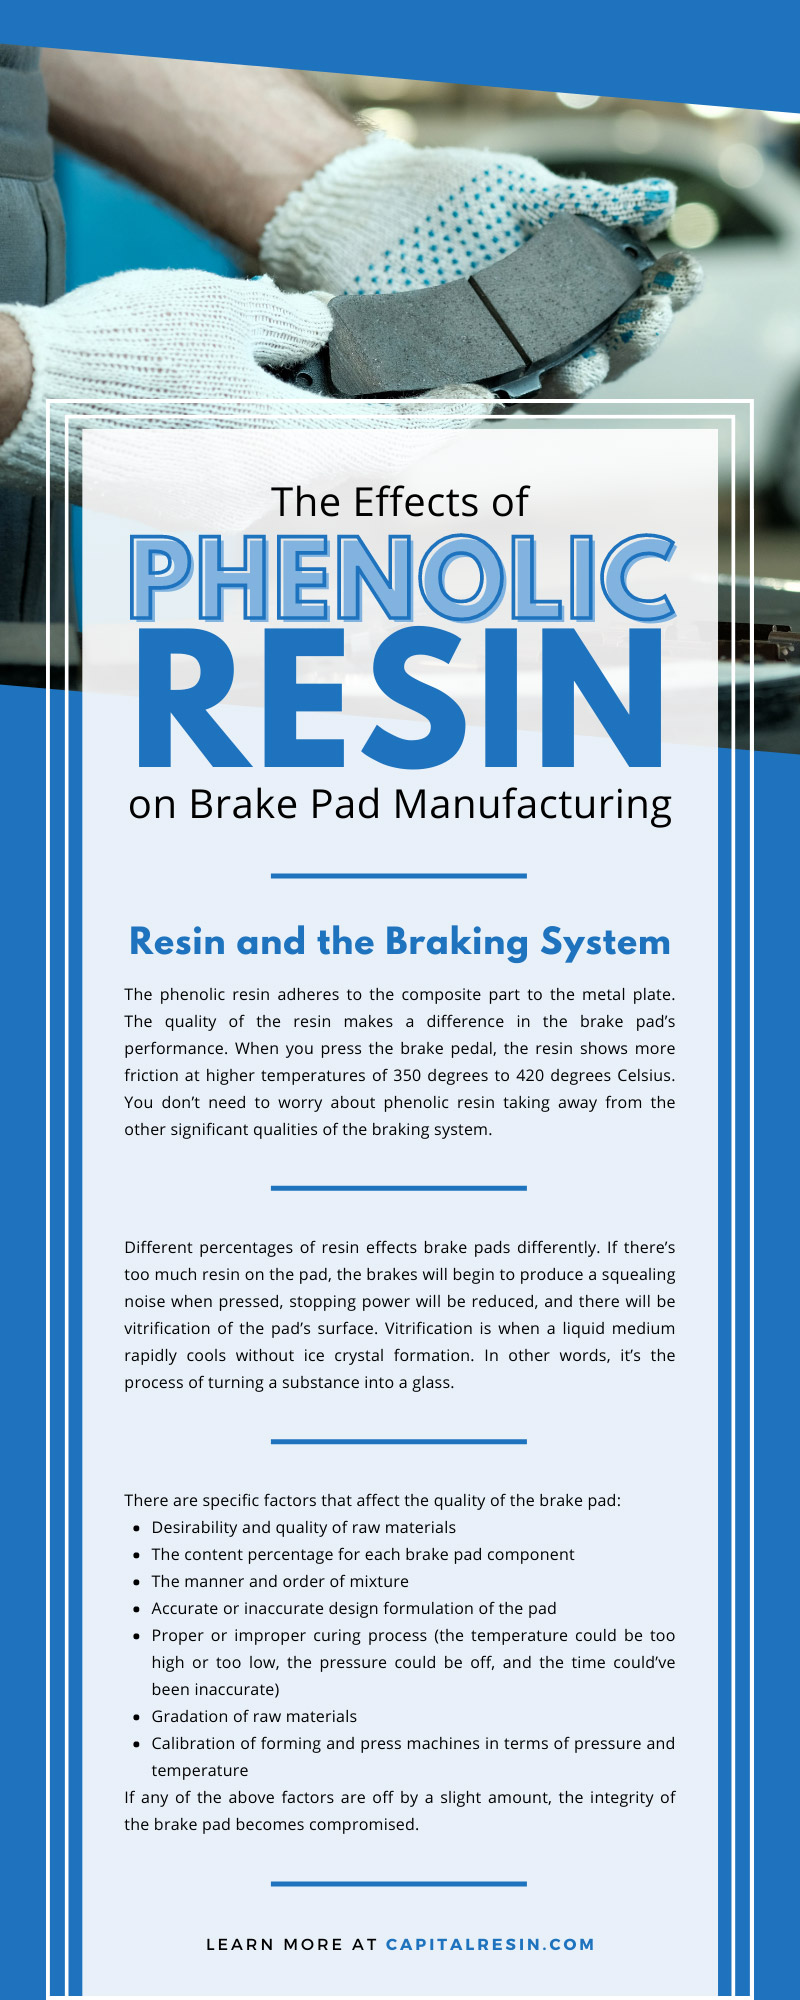 The Effects of Phenolic Resin on Brake Pad Manufacturing